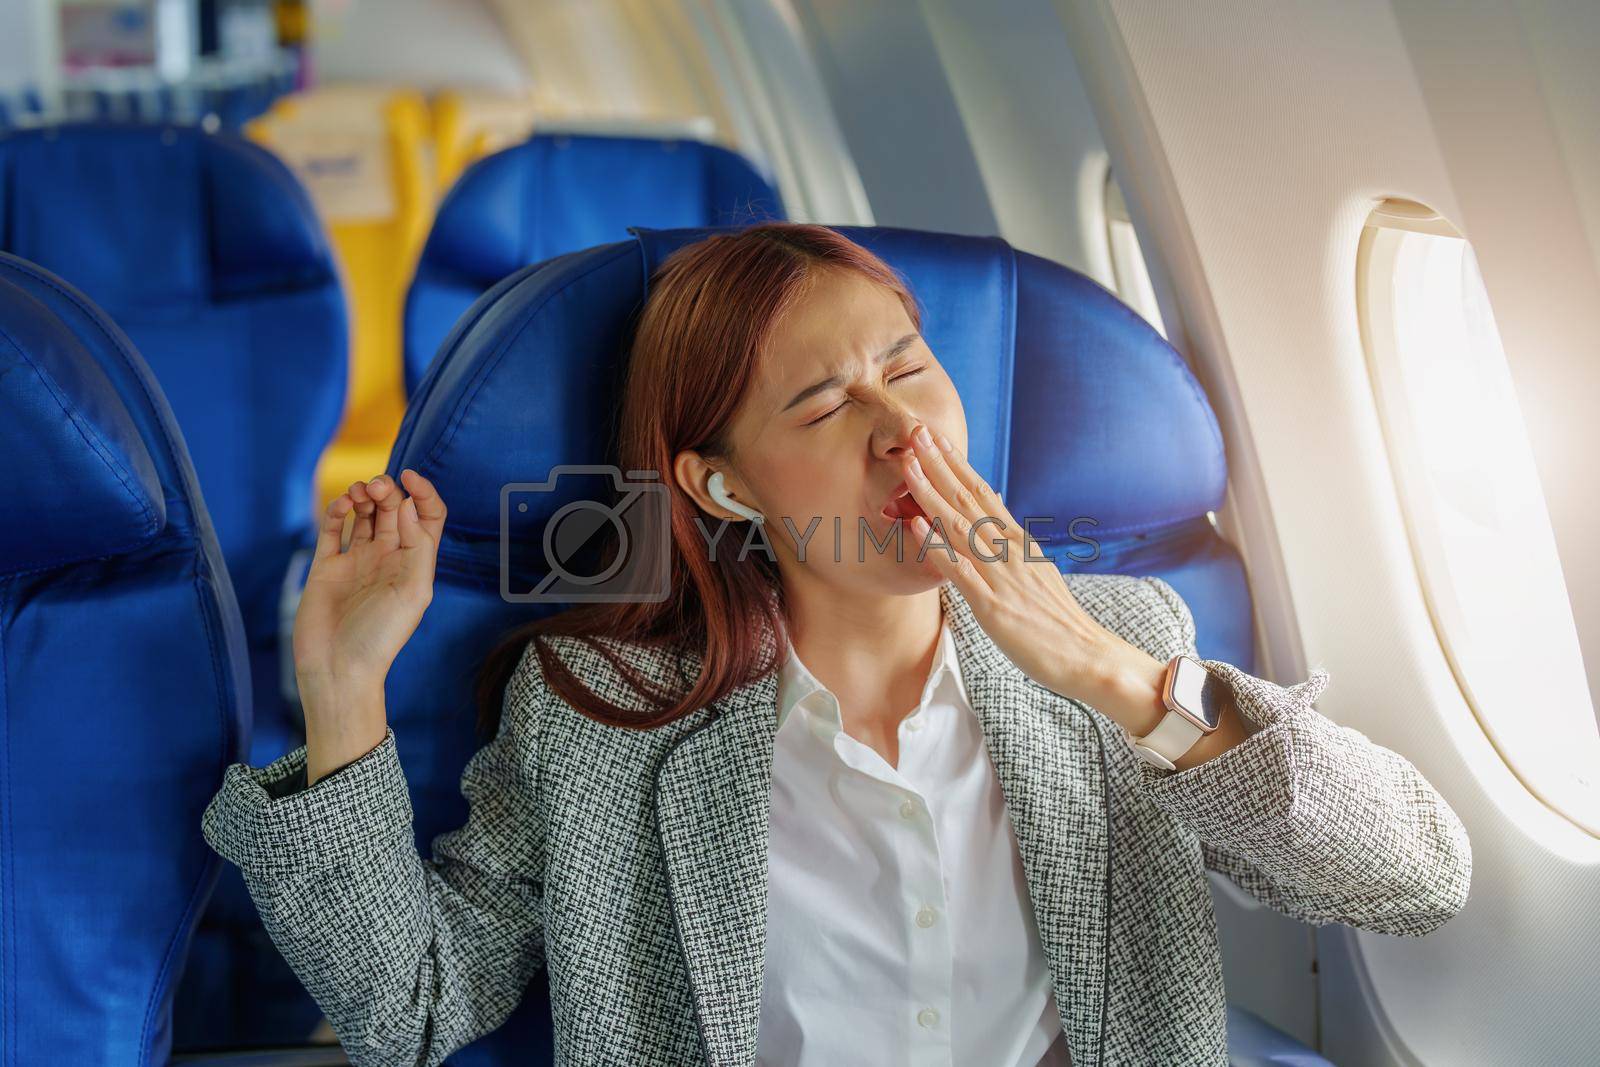 Royalty free image of Portrait of a successful Asian businesswoman or entrepreneur in a formal suit on an airplane in business class waking up from resting between flights by Manastrong